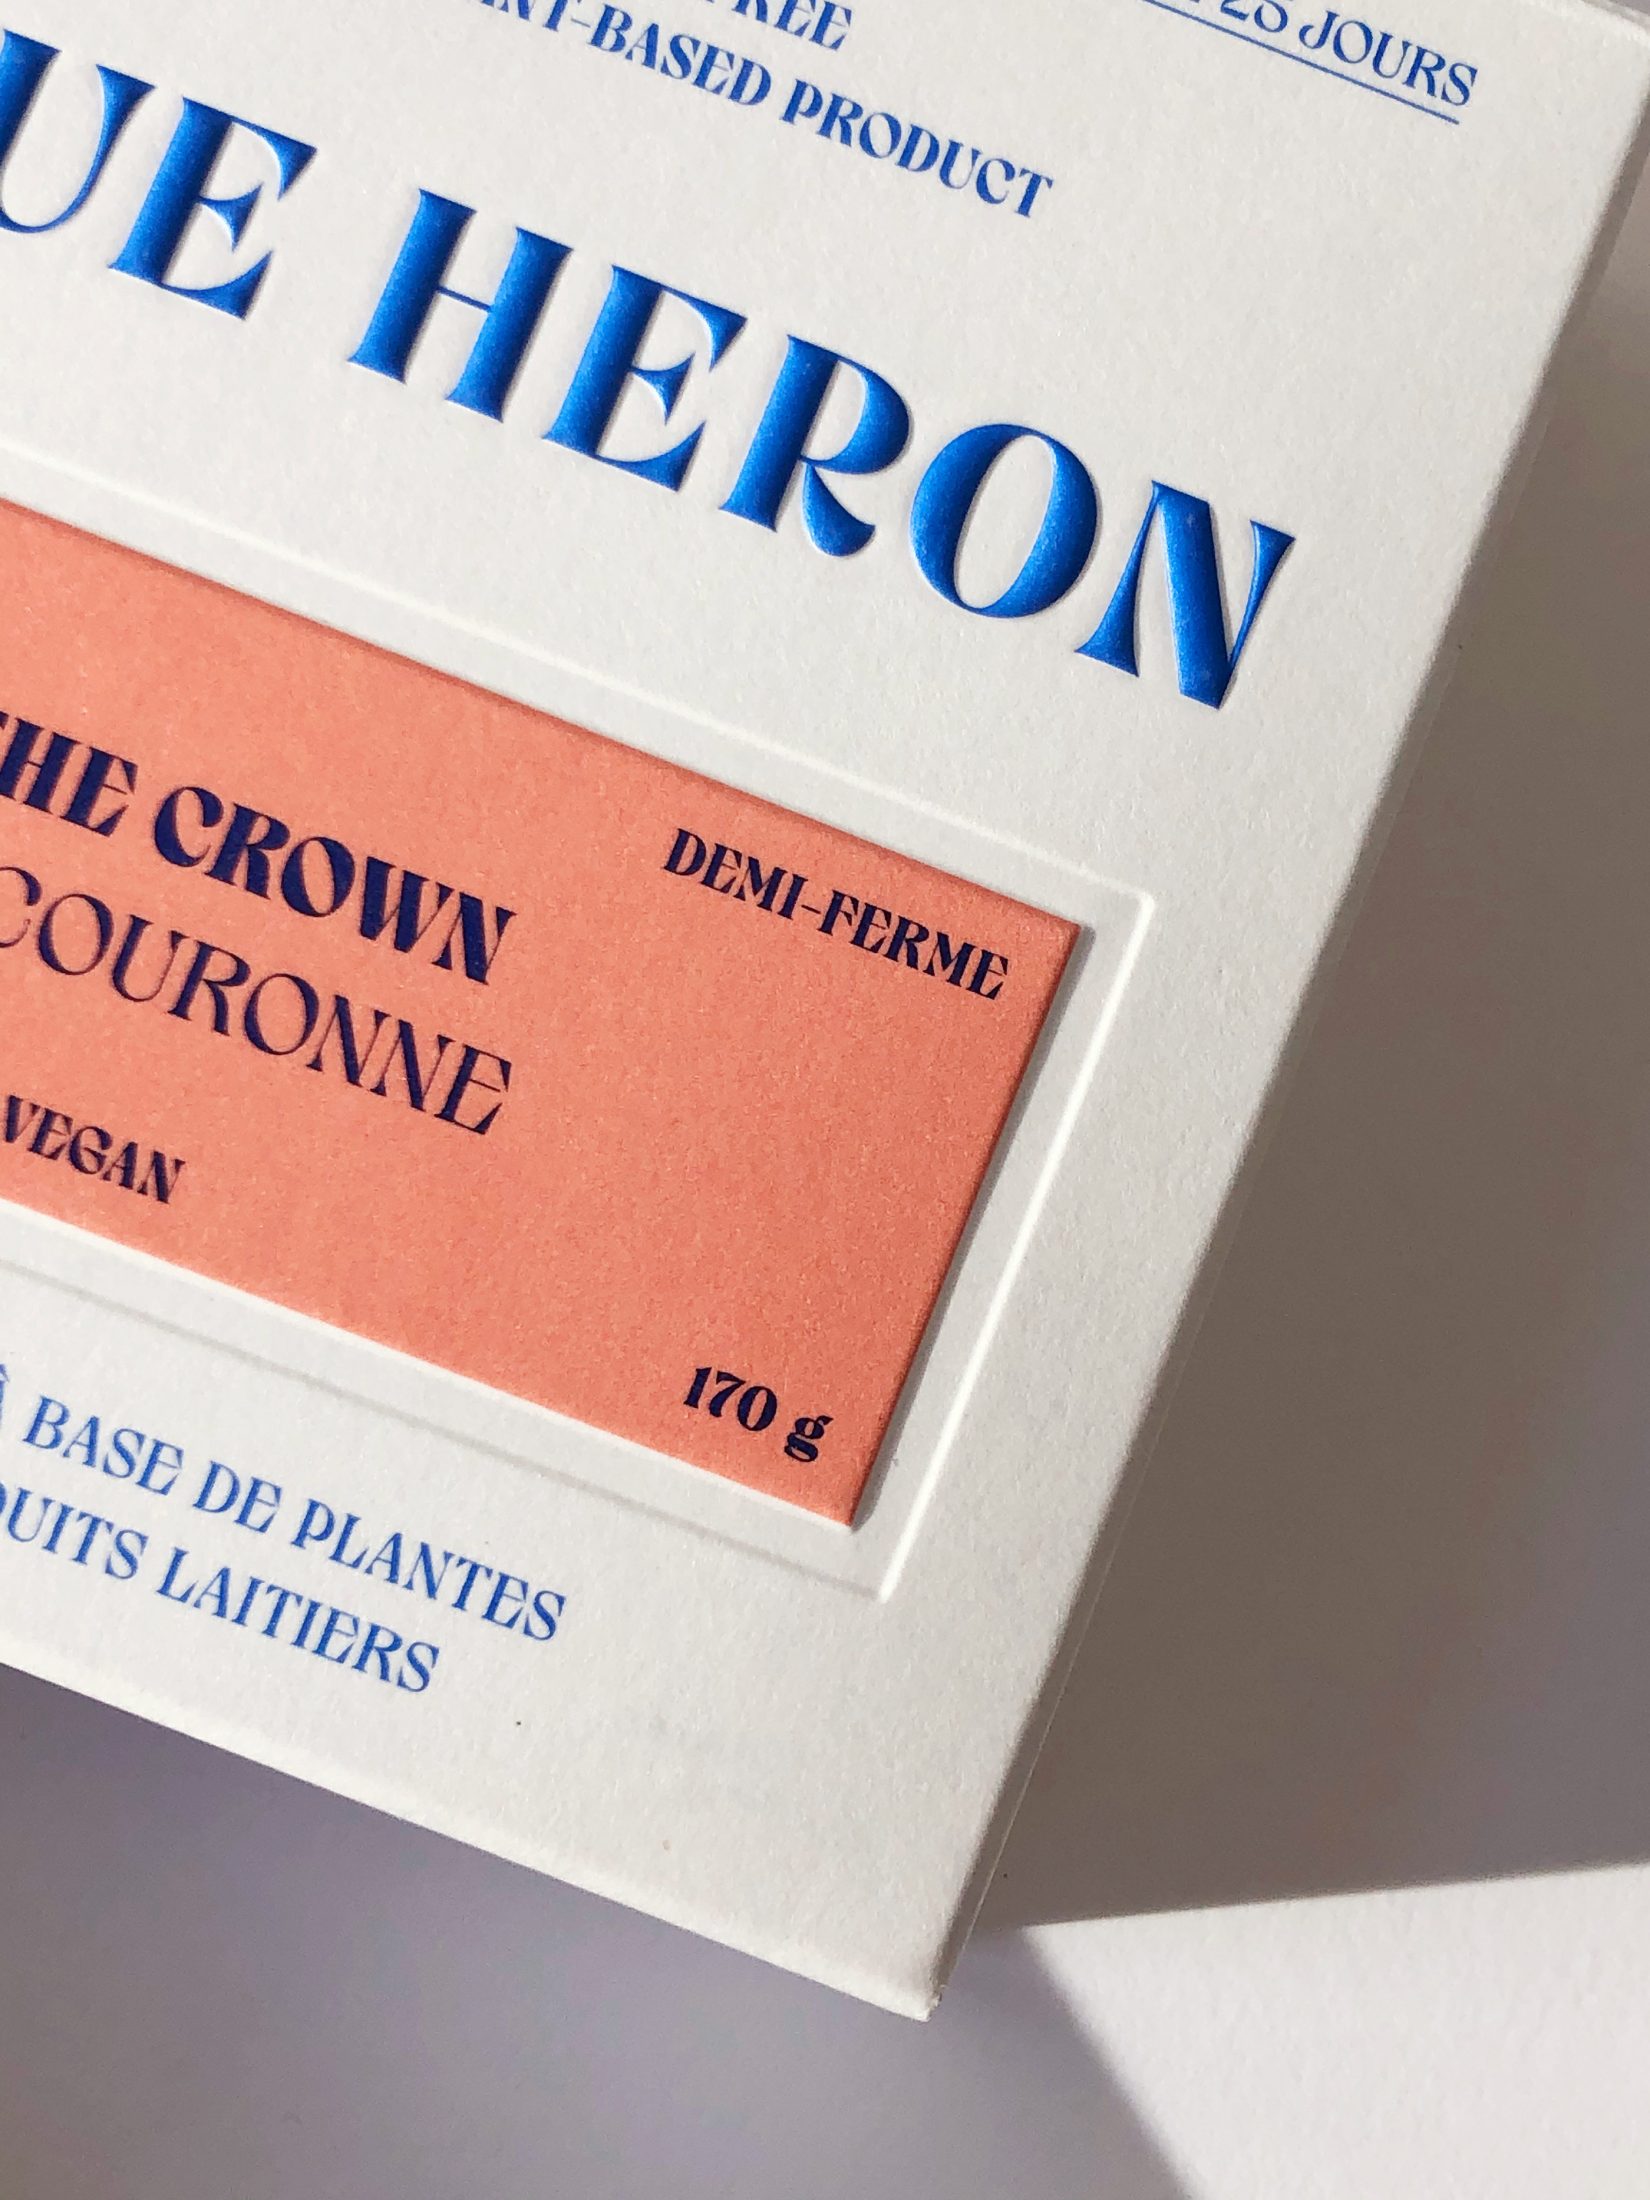 Box design for Blue Heron, plant based cheese.